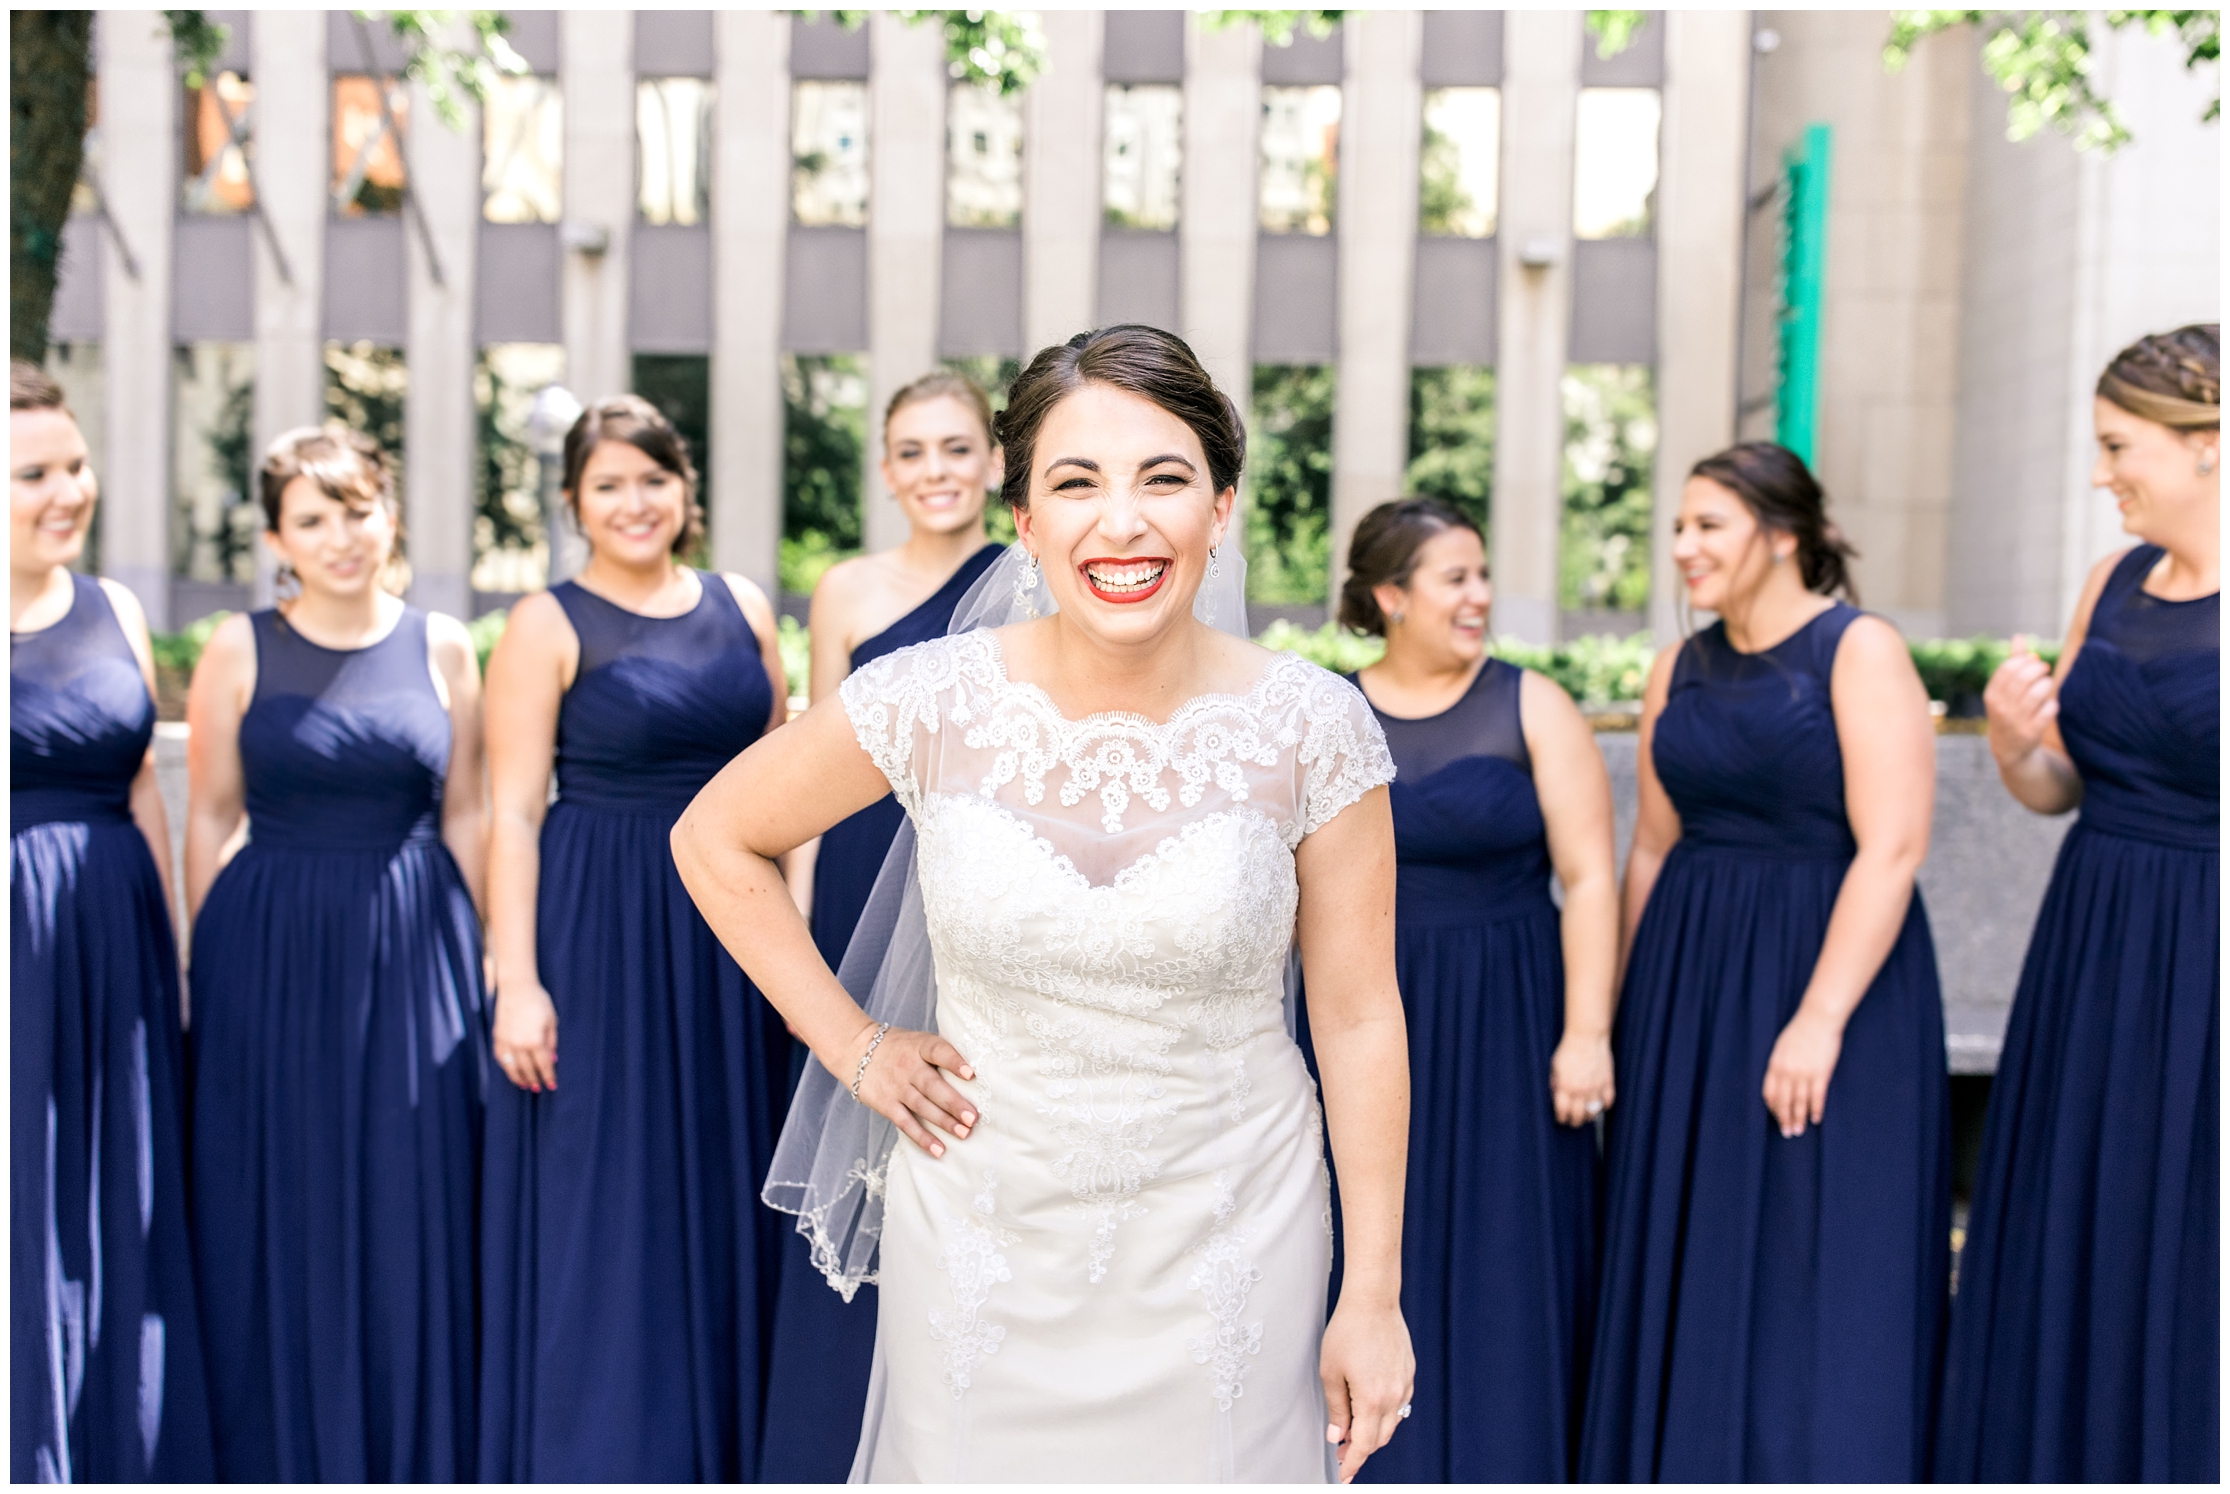 long navy blue bridesmiads dresses, blue and coral wedding, blue and coral wedding pittsburgh, pittsburgh bride, pittsburgh wedding, pittsburgh bridal party, upscale pittsburgh wedding, Mellon Square Pittsburgh, Mellon Square Wedding Photos, Mellon Square Wedding Photographer, Mellon Square Wedding Photography, Onmi William Penn Pittsburgh Pa, Omni William Penn Hotel Wedding, Omni WIlliam Penn Wedding photo, Omni William Penn Wedding photographer, Best Wedding Photographer in Pittsburgh, Best Omni William Penn Wedding Photos, Best Omni William Penn Wedding pictures